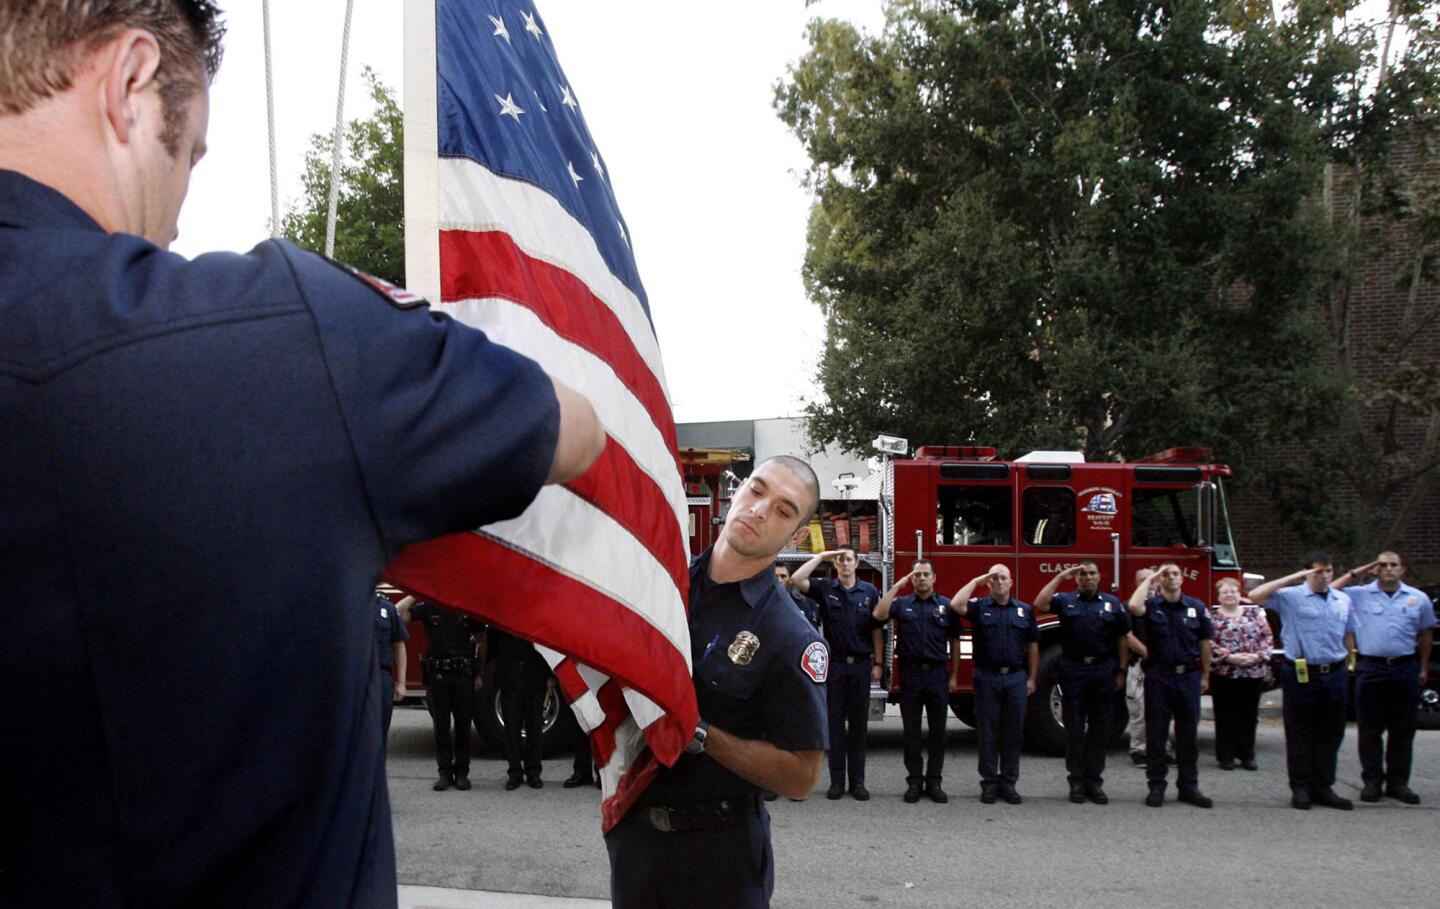 Glendale Fire Station 21 firefighters Andrew Gano, left, and Ara Hoonanian, right, raise Old Glory during 911 ceremony at Station 21 on Tuesday, Sept. 11, 2012. The ceremony, where some names of victims were read by GFD and Glendale Police, was done to commemorate those who died on Sept. 11 2001 in attacks in New York City, The Pentagon and Pennsylvania.